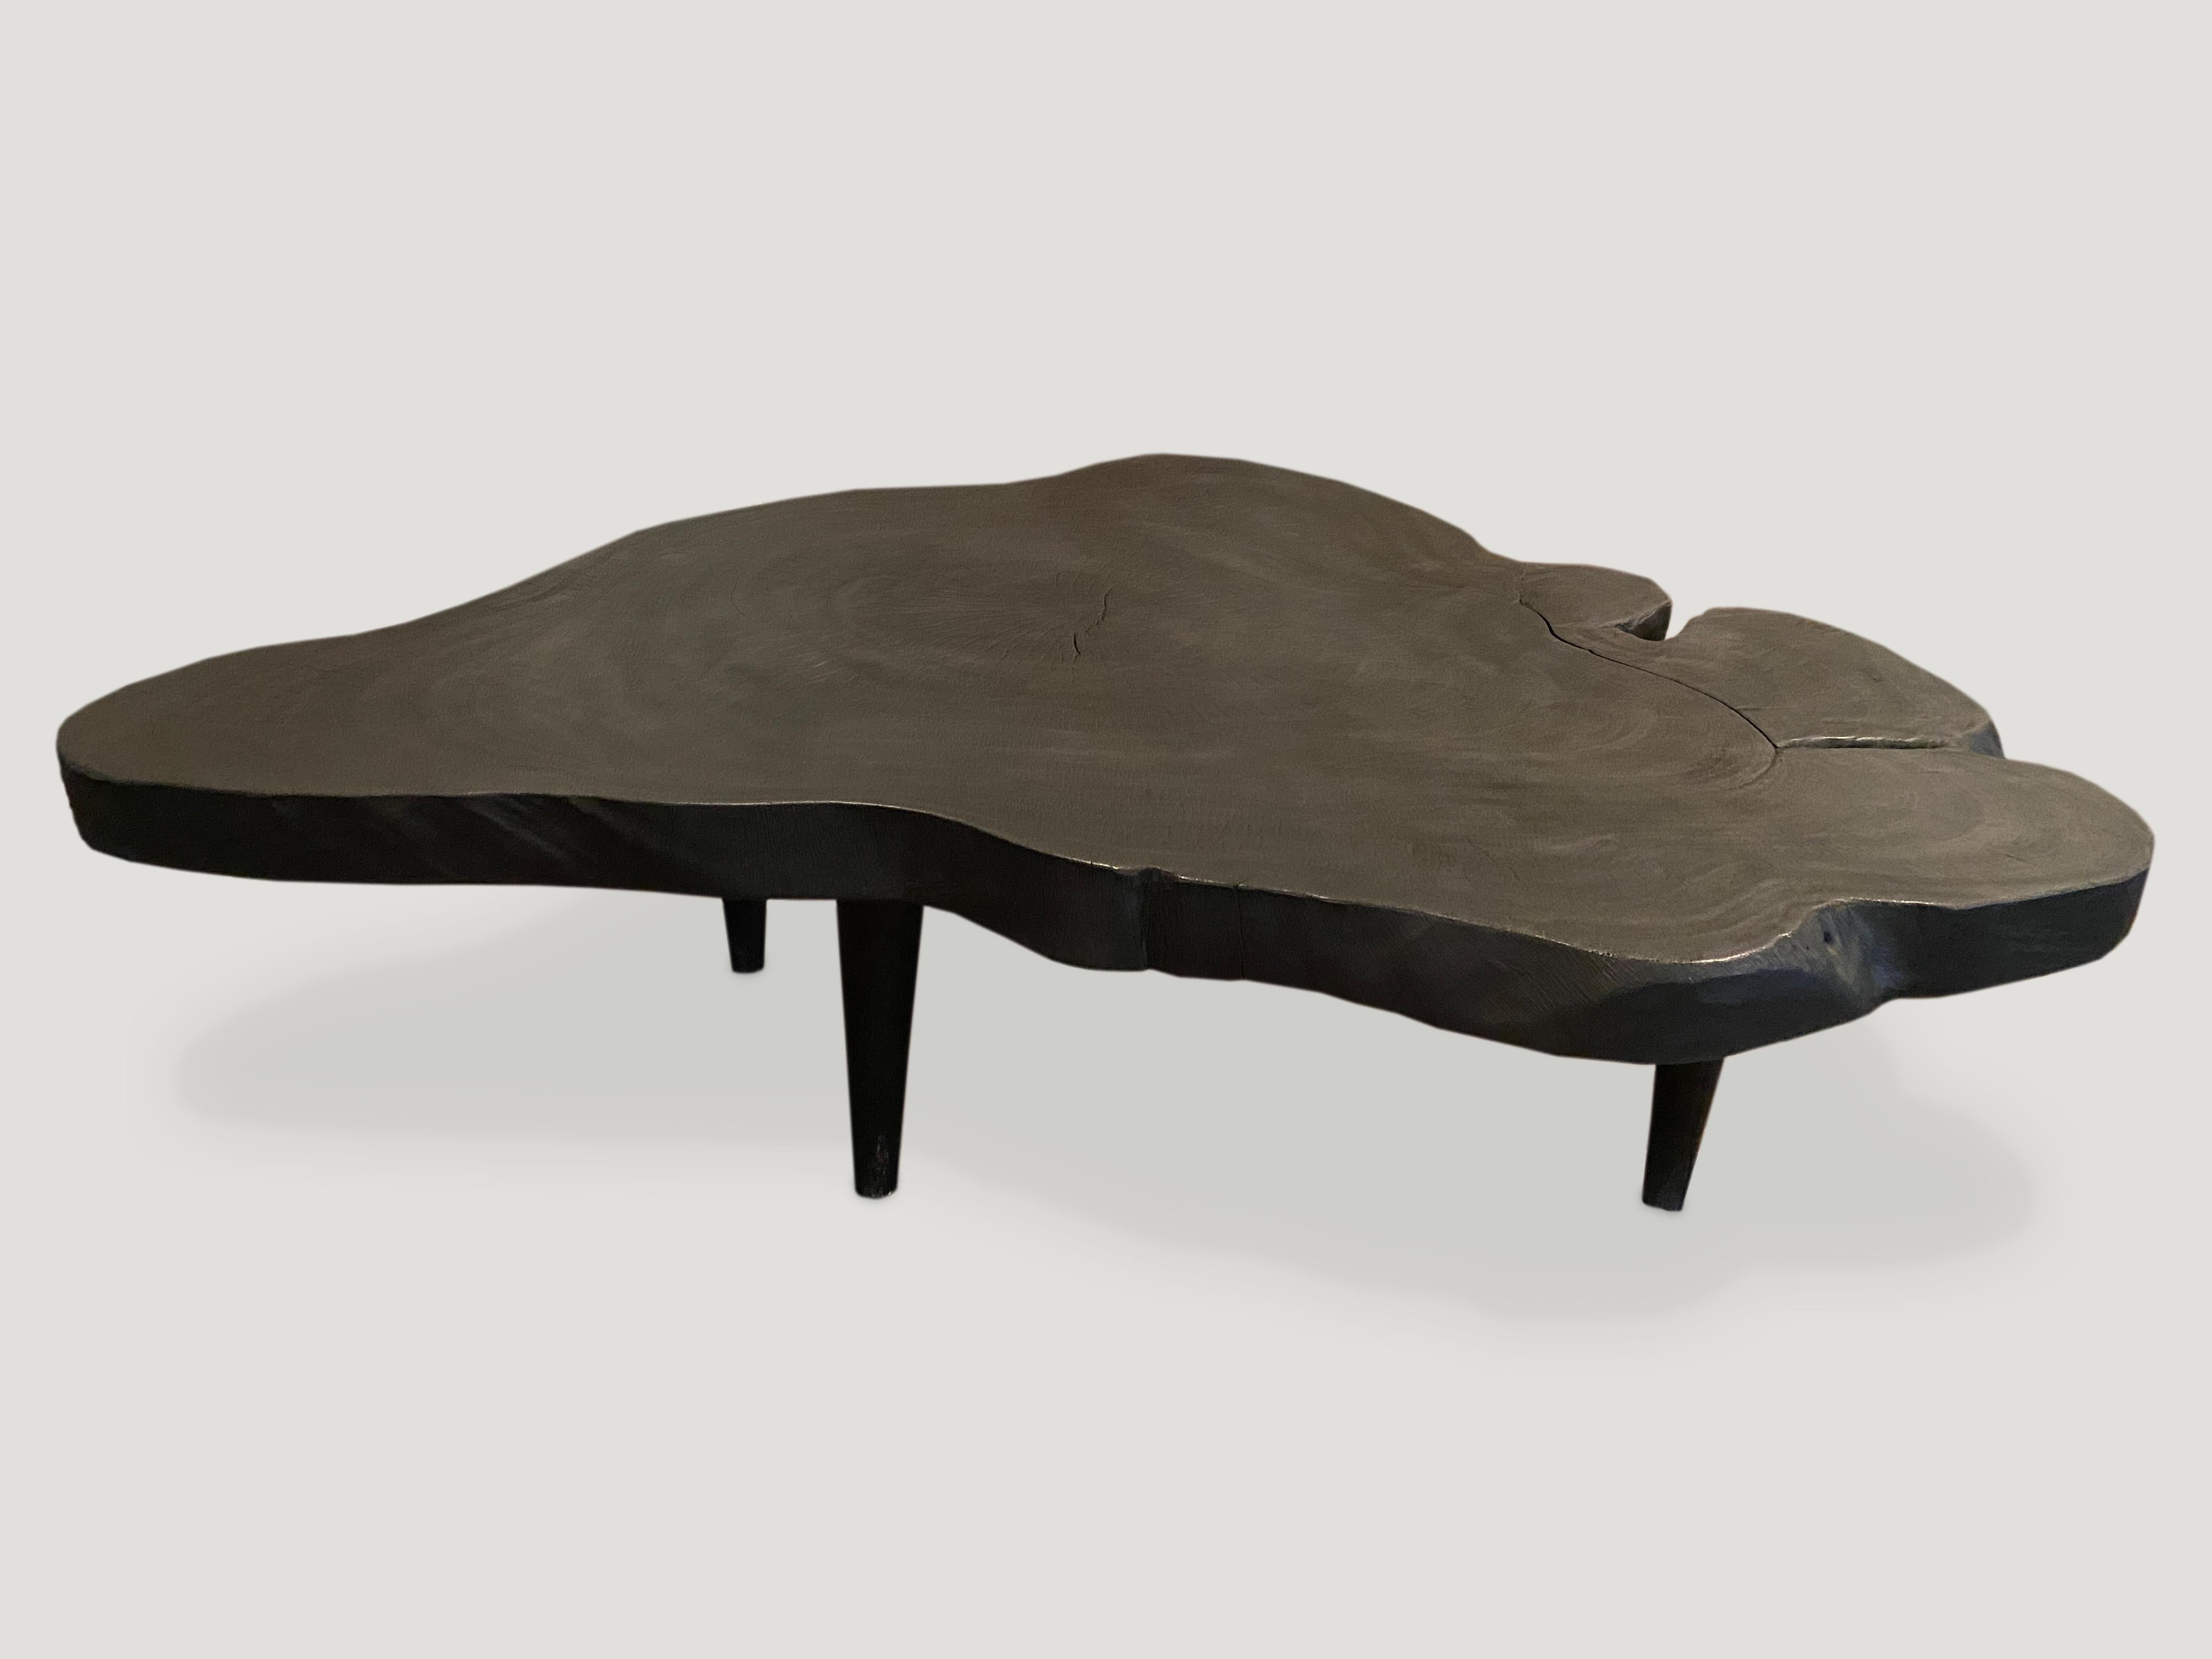 Reclaimed suar wood coffee table made from a single three inch slab. Charred and set on mid century style legs. A perfect combination of modern and organic.

The Triple Burnt Collection represents a unique line of modern furniture made from solid